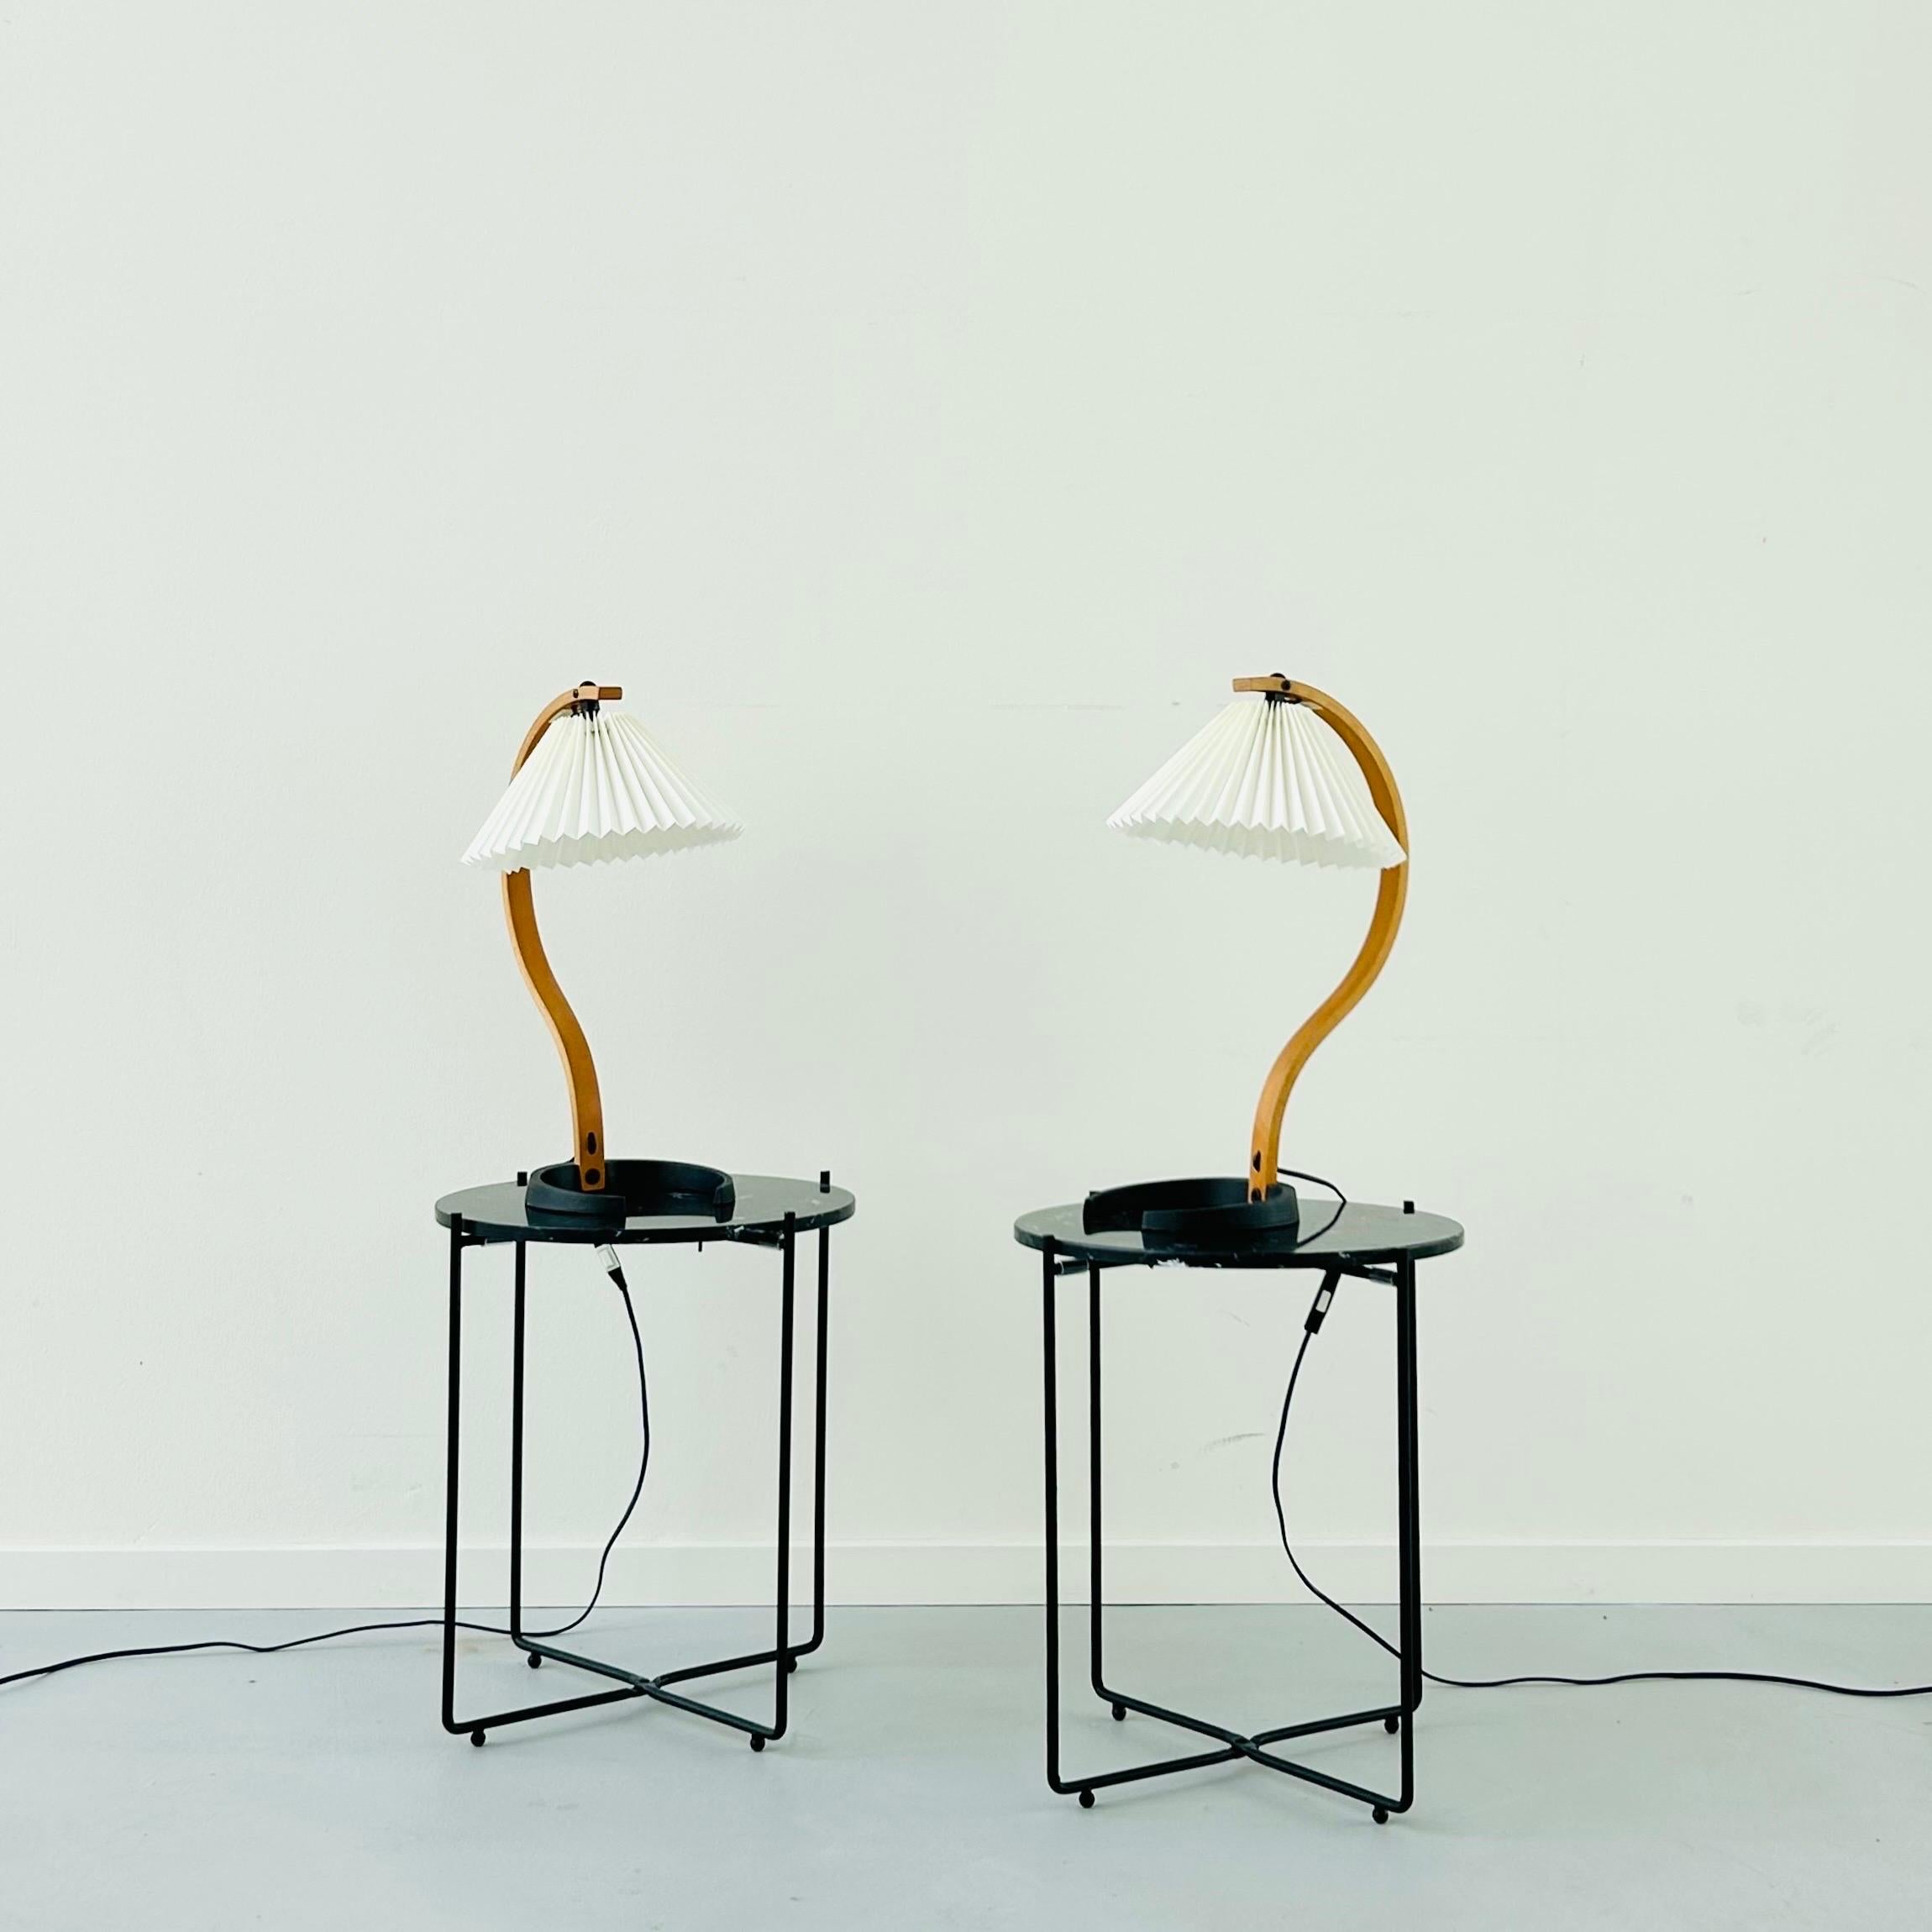 A stunning pair of original Danish desk lamps by Mads Caprani. The style is call no. 841 and is the desk version of the famous Caprani floor no. 840 Timbeline floor lamp.

It is a stunning pair that effortlessly captures the timeless Scandinavian